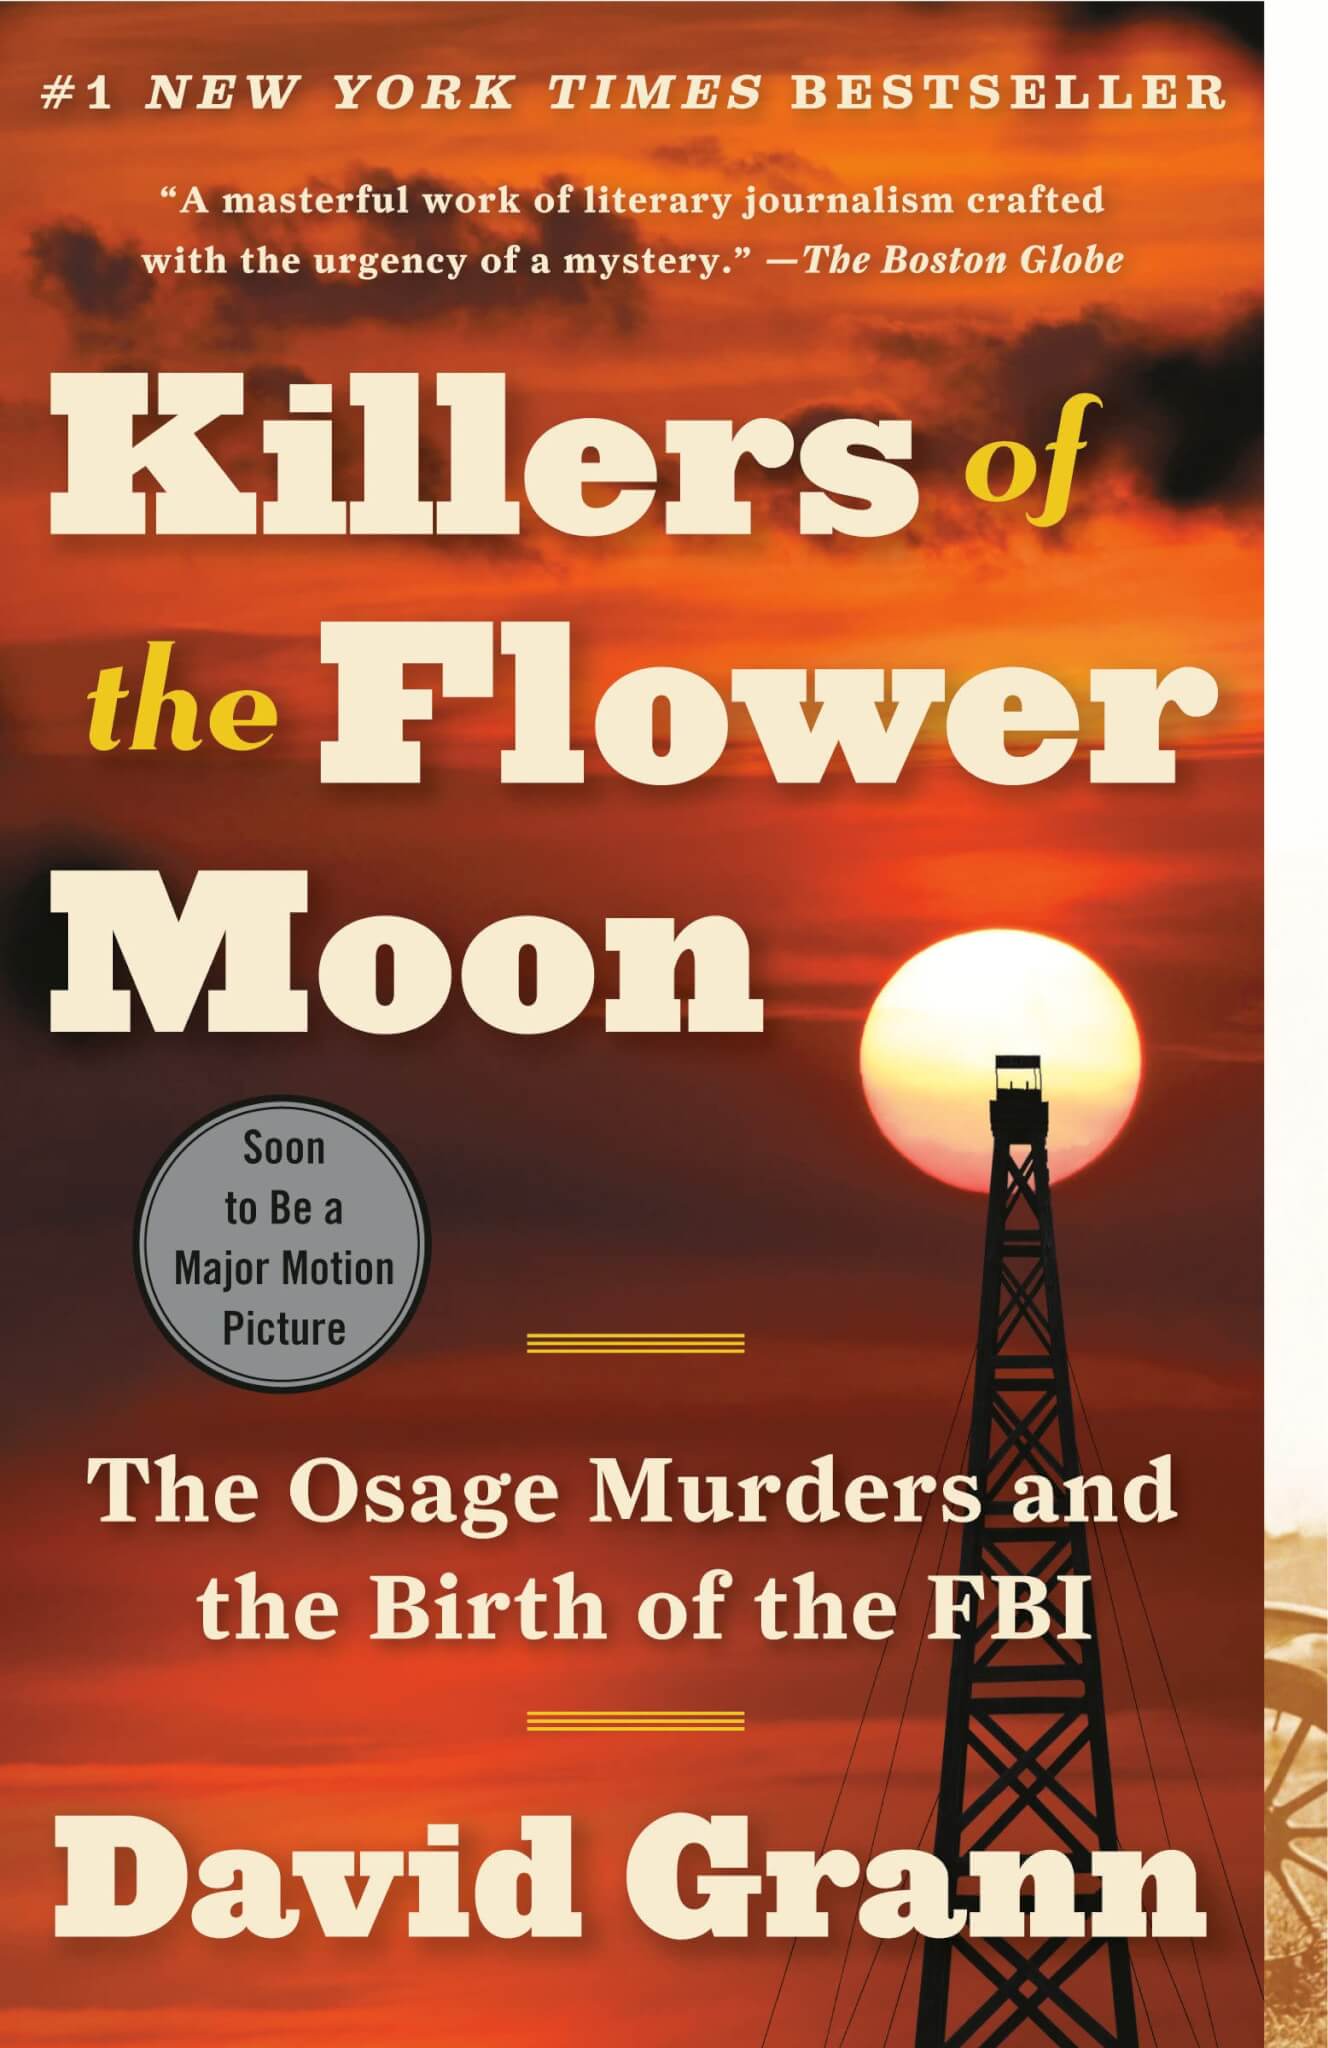 "Killers of the Flower Moon: The Osage Murders and the Birth of the FBI" by David Grann